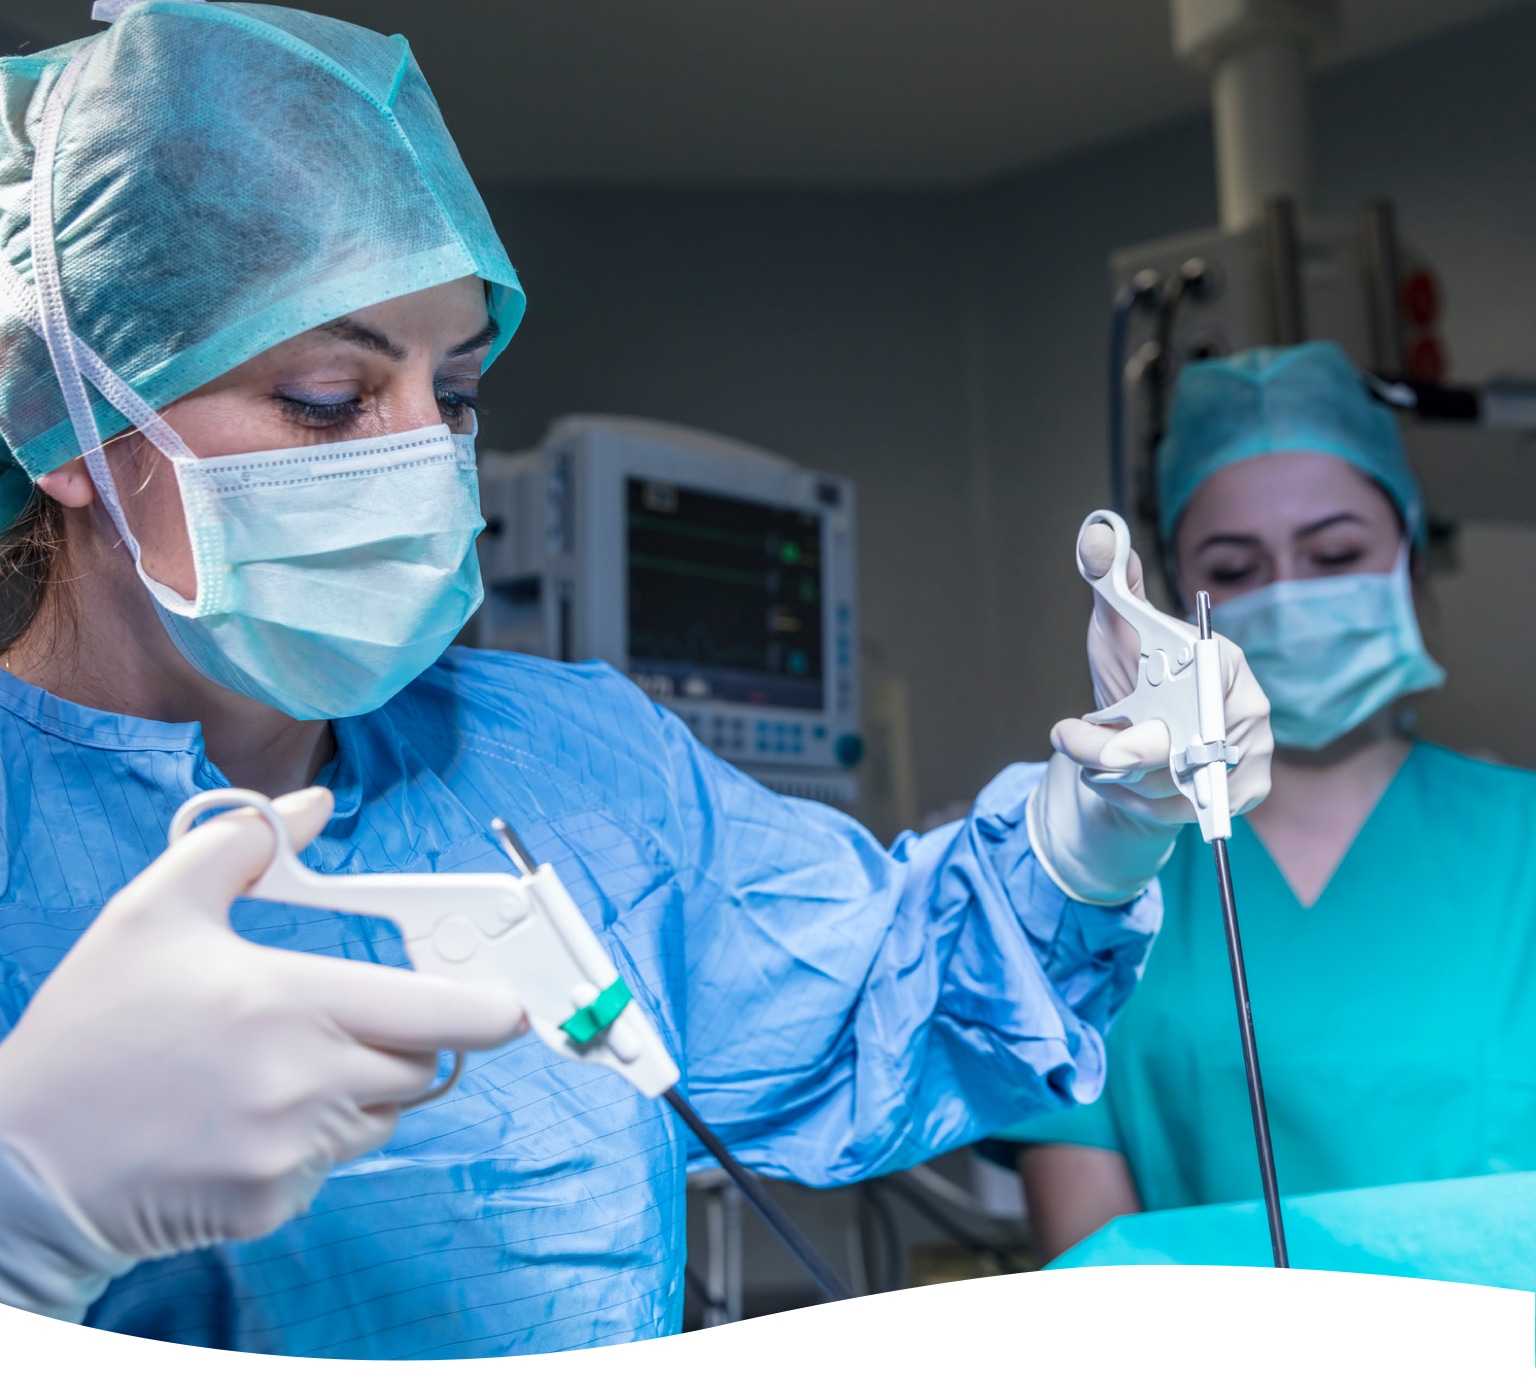 two medical surgeons using surgical devices in operating room